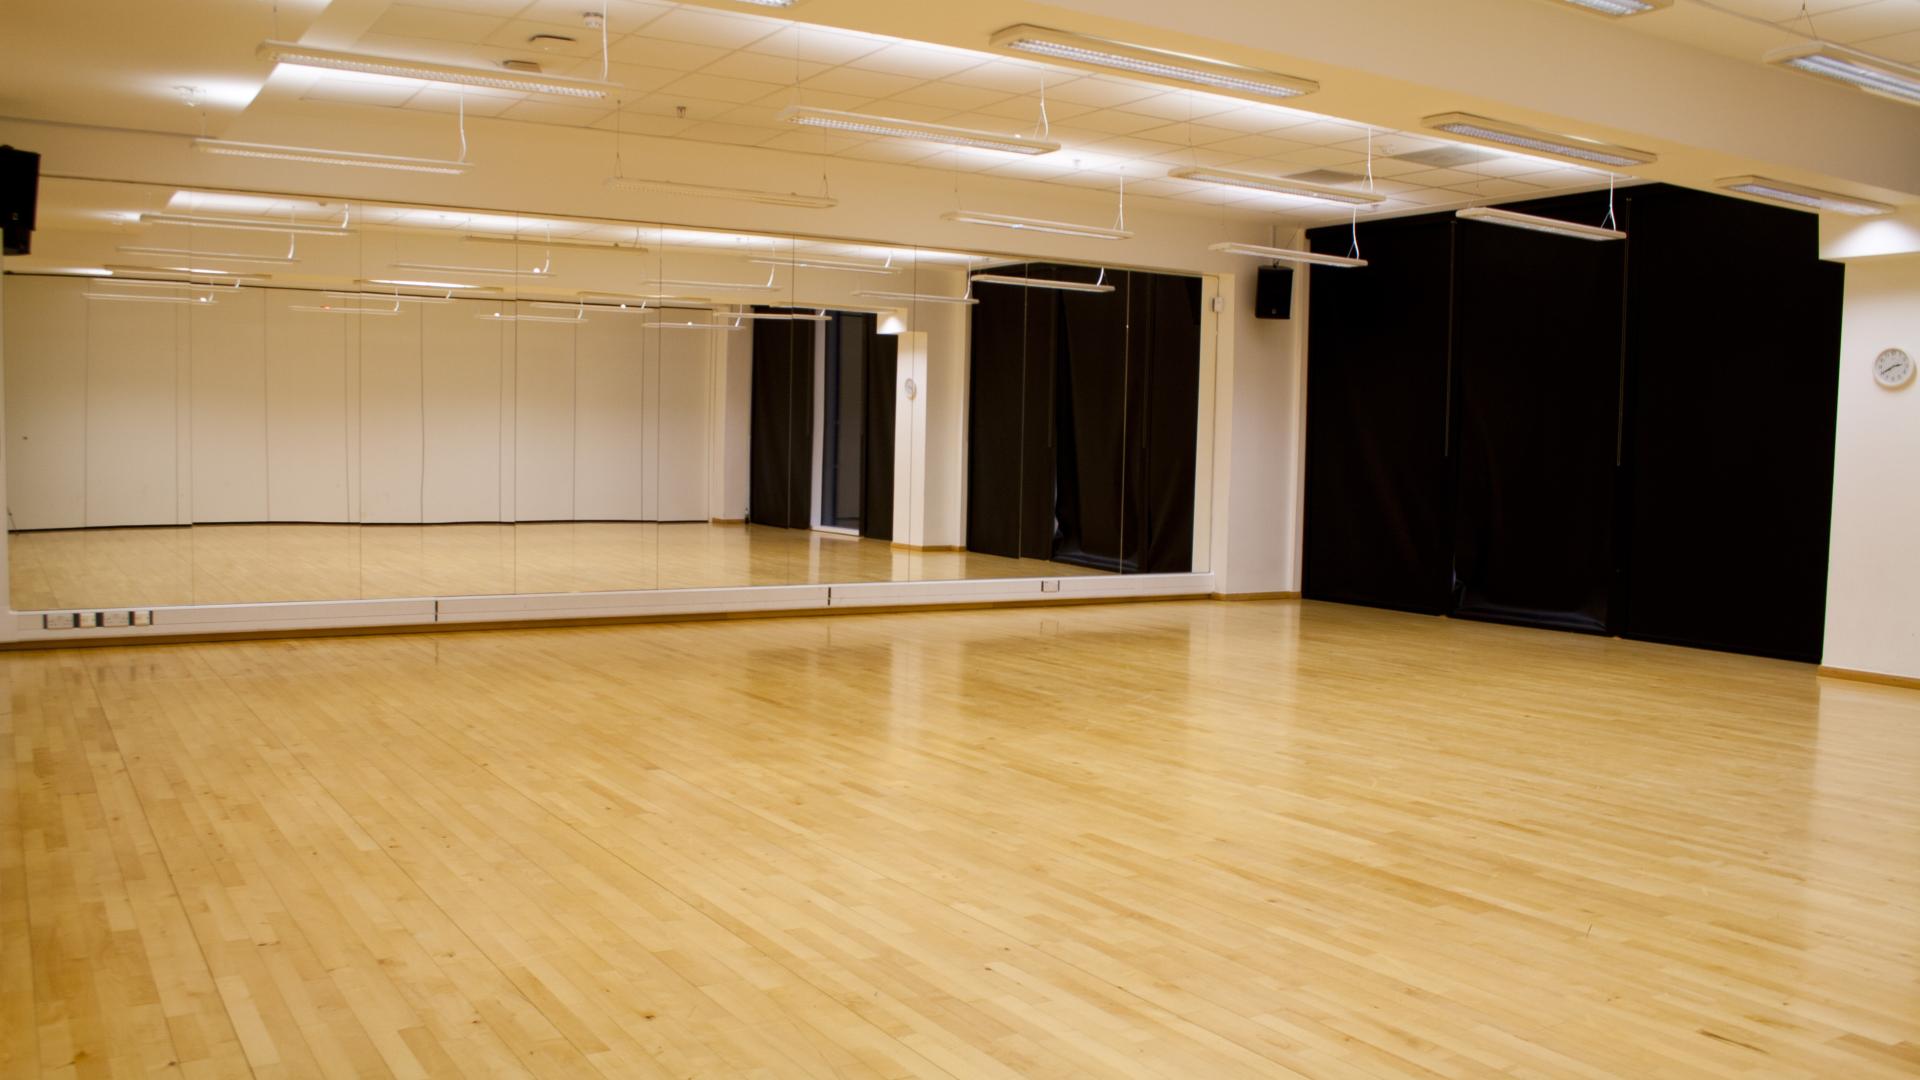 Rehearsal Studios for Hire in South London